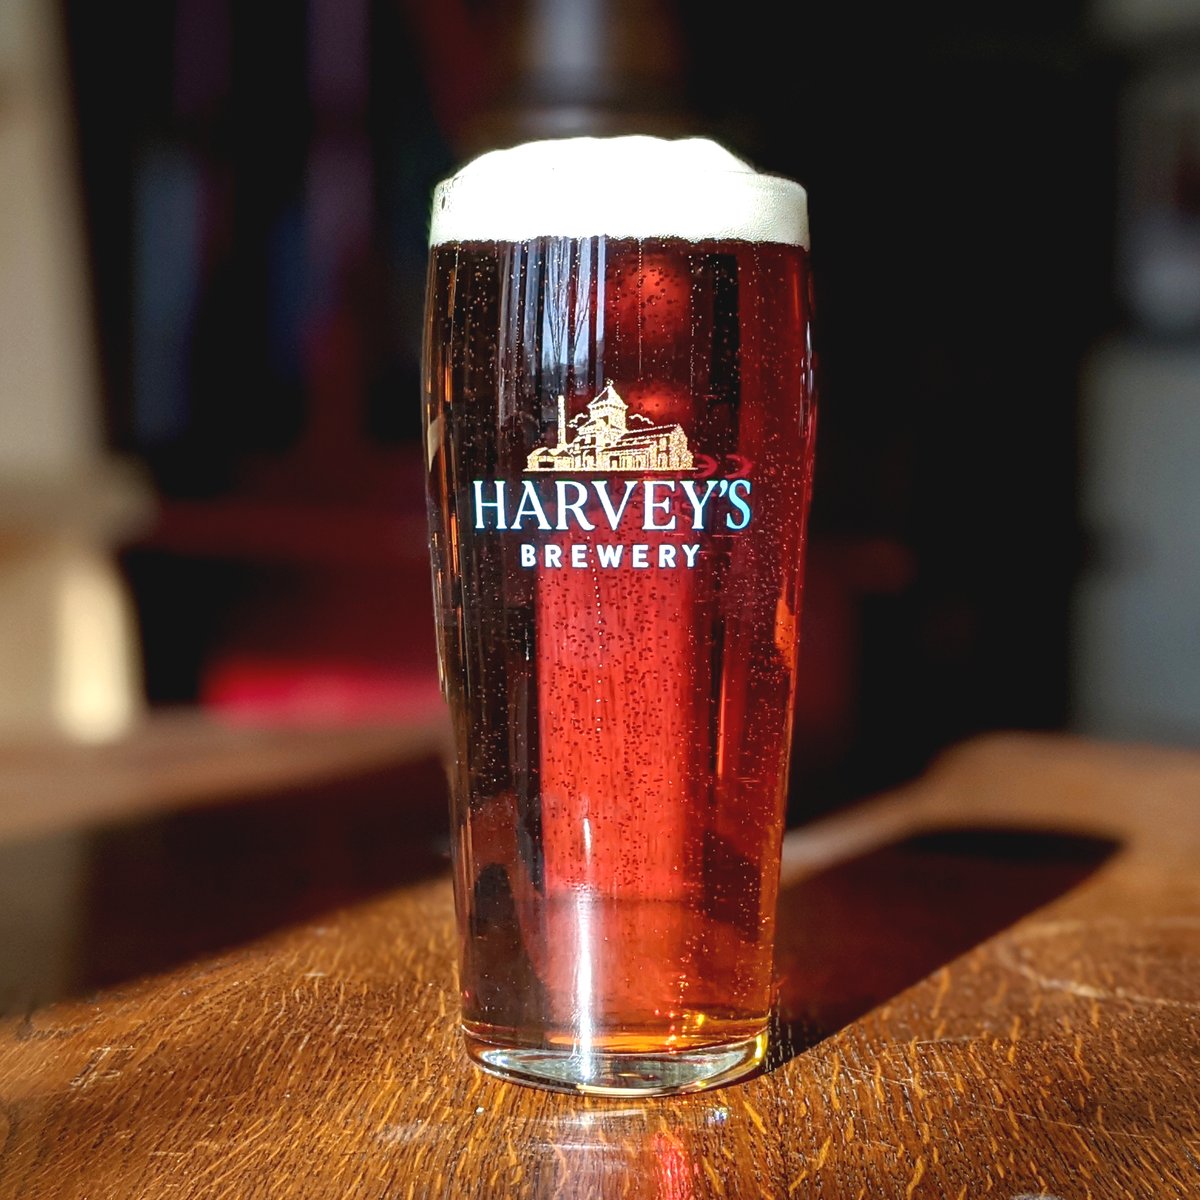 Time for a beer 🍻

#friday #pub #sussexbestbitter  #harveysbrewery